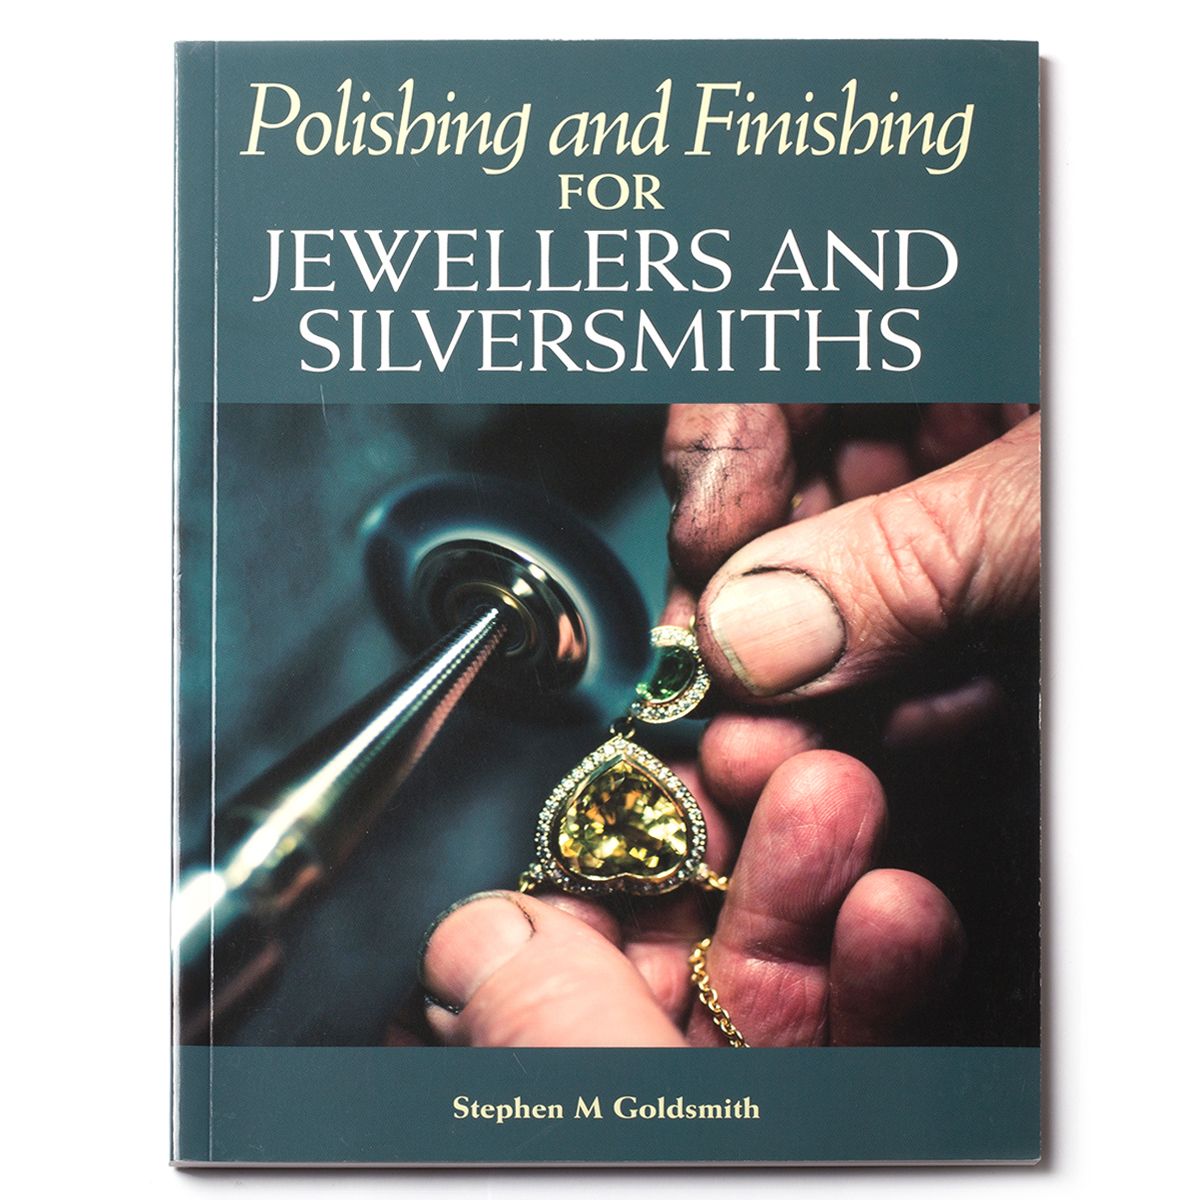 3 Simple Steps to Achieve Perfect Jewelry Polishing - Stuller Blog